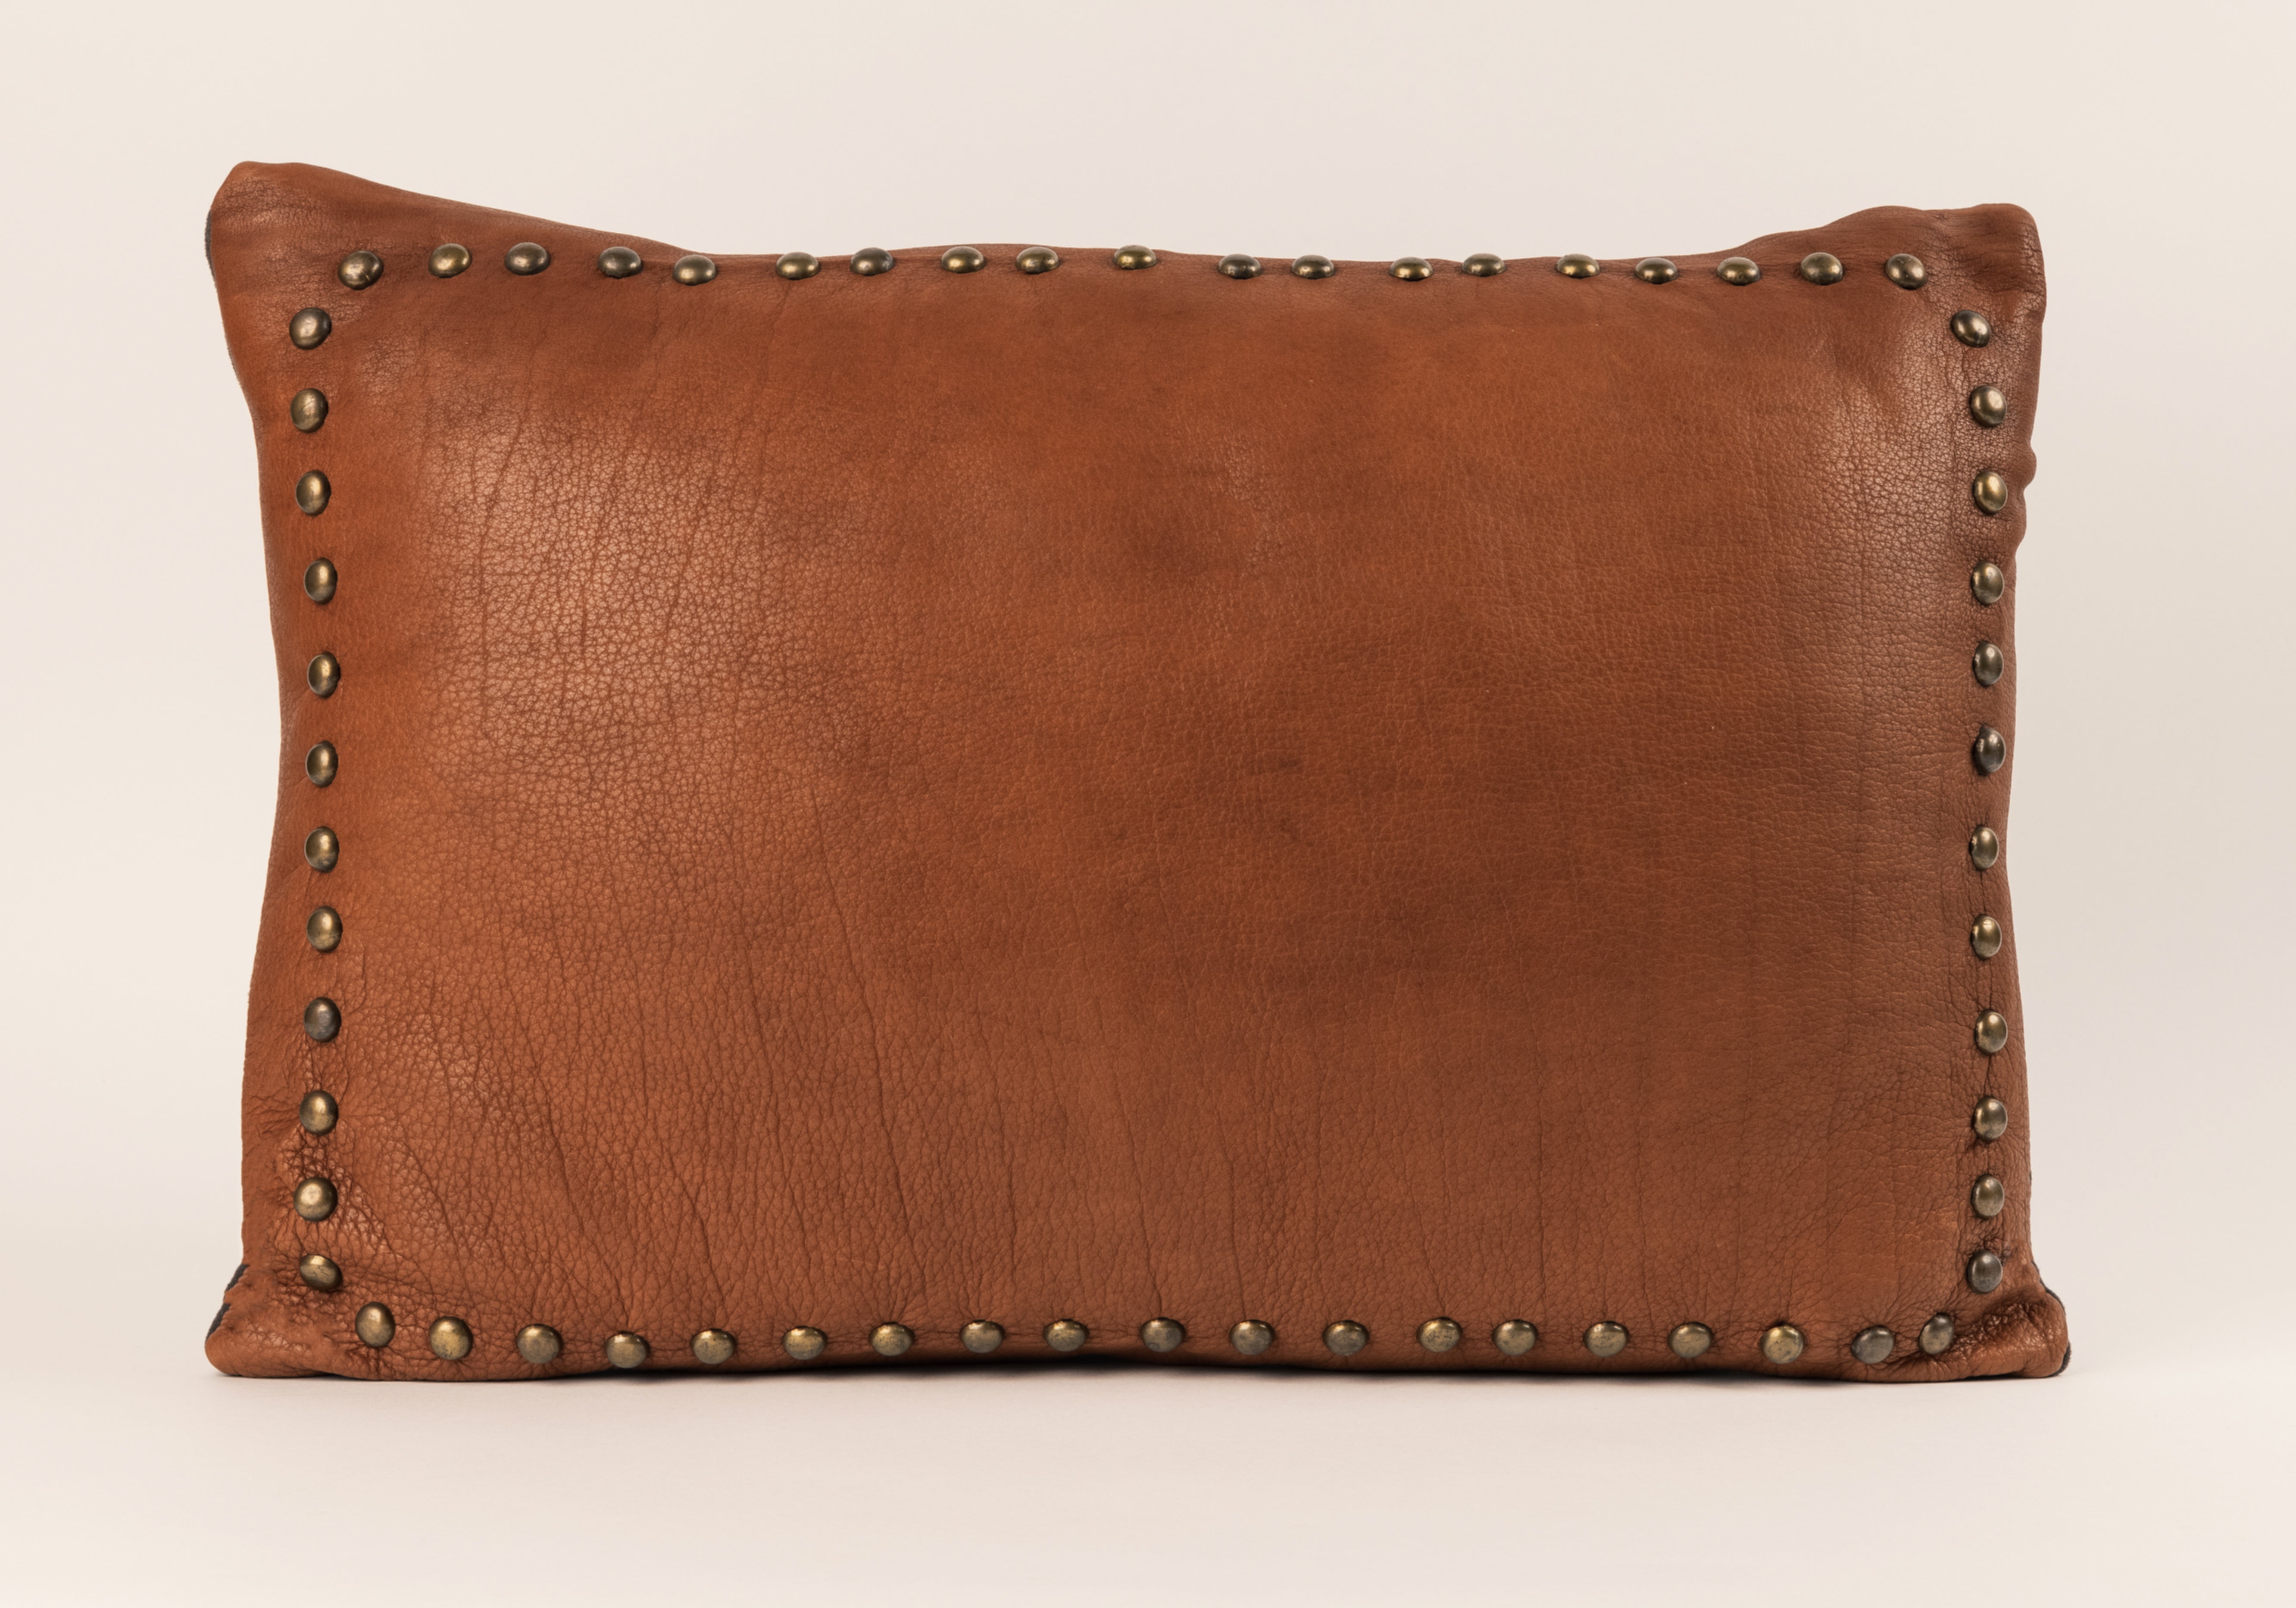 Tan color leather front with silver spots